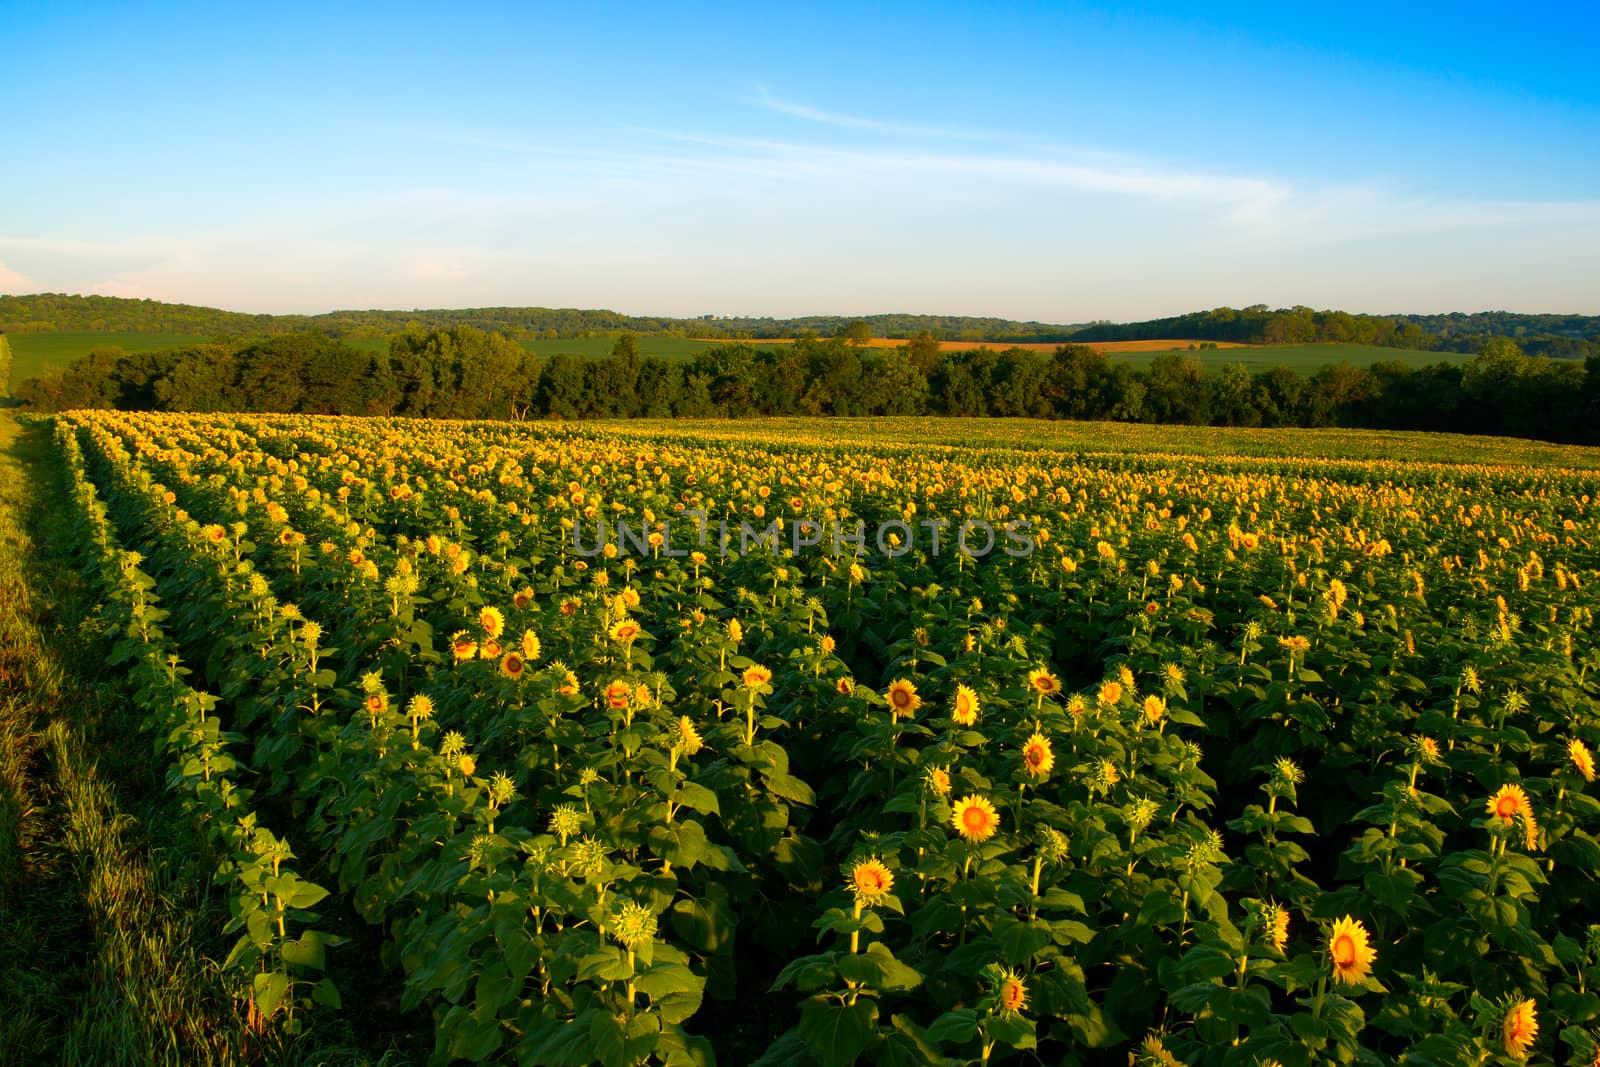 Field of Yellow Sunflowers by TommyBrison